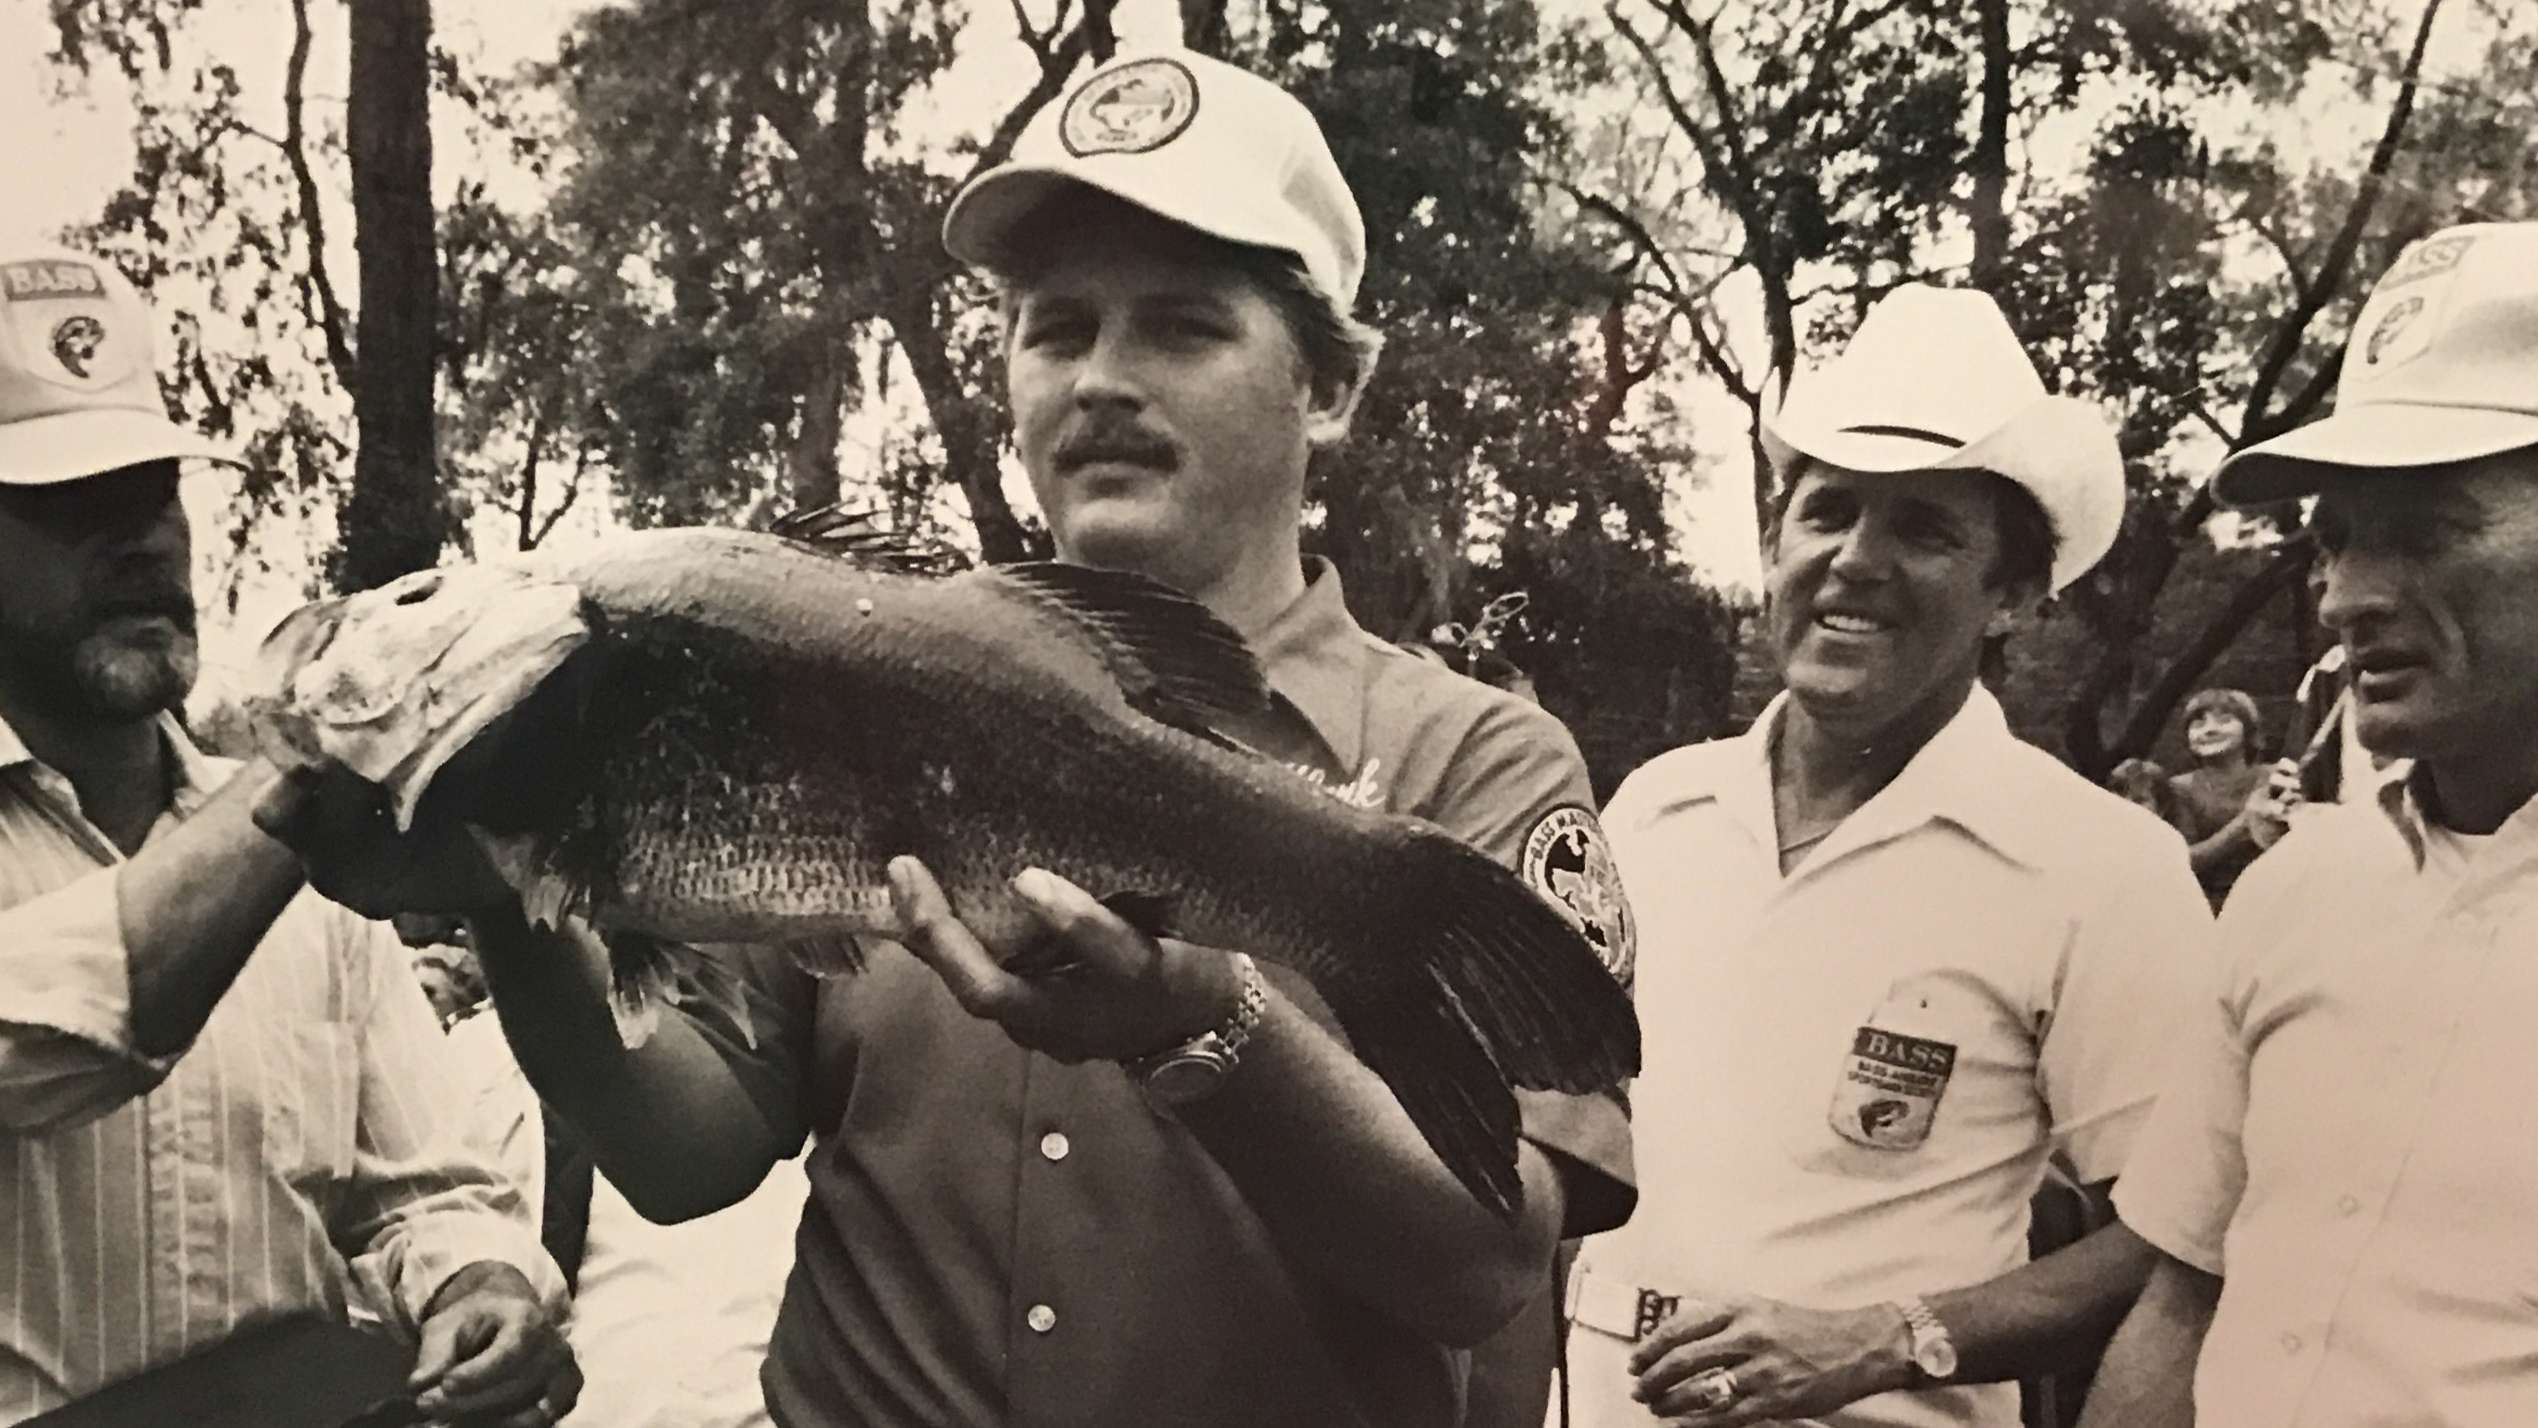 Perhaps the only surprising number about Texas and fishingâs grandest stage is that only one Bassmaster Classic has been held there â the 1979 championship on Lake Texoma out of Pottsboro. It was won by Hank Parker (who at least has a name that sounds Texan, though he was born in North Carolina).